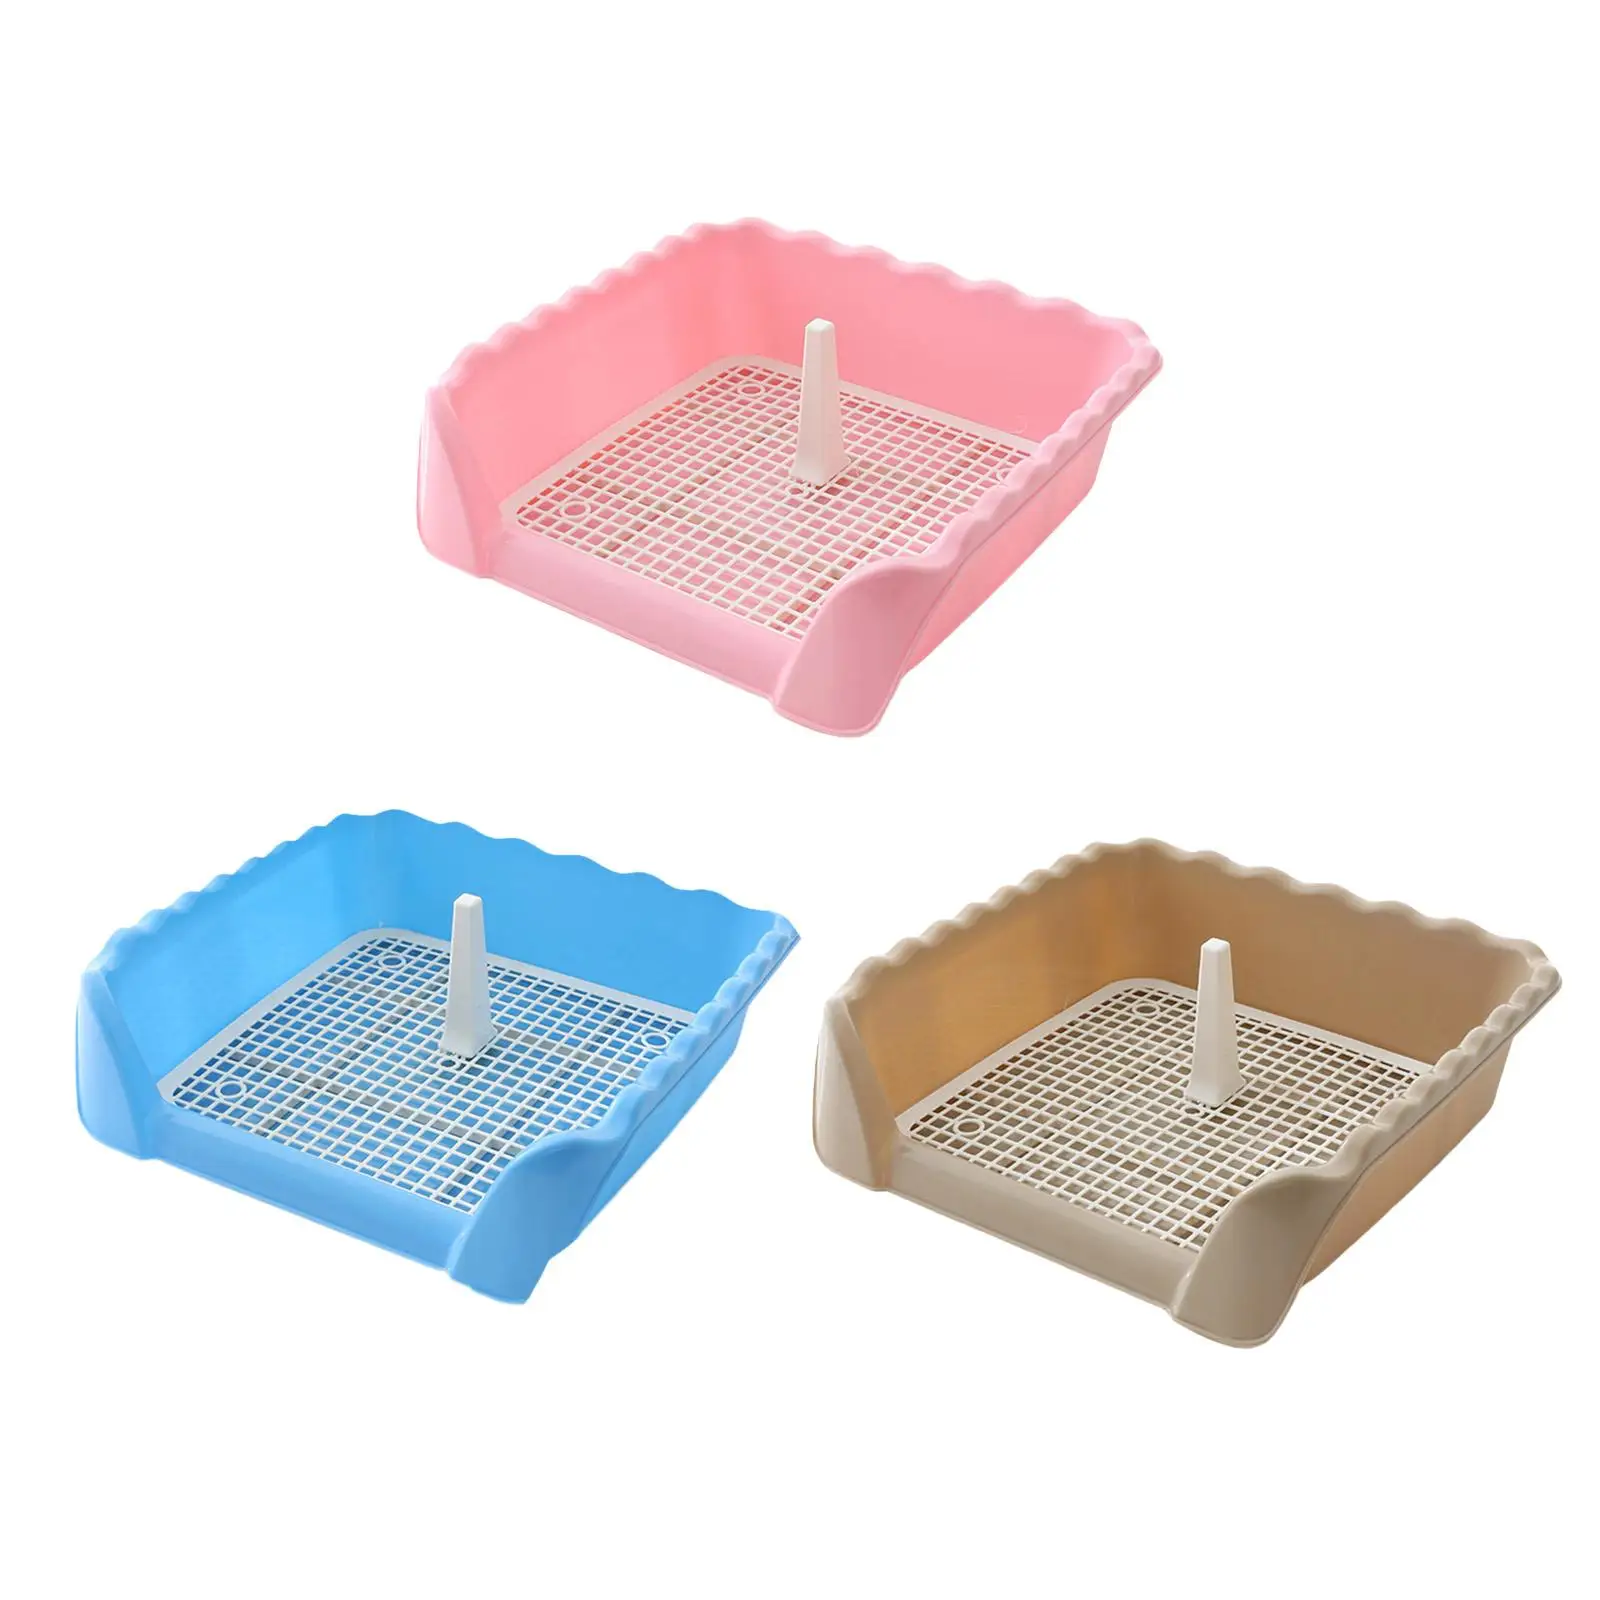 Indoor Dog Potty Tray with Protection keep Floors lean Dog Toilet